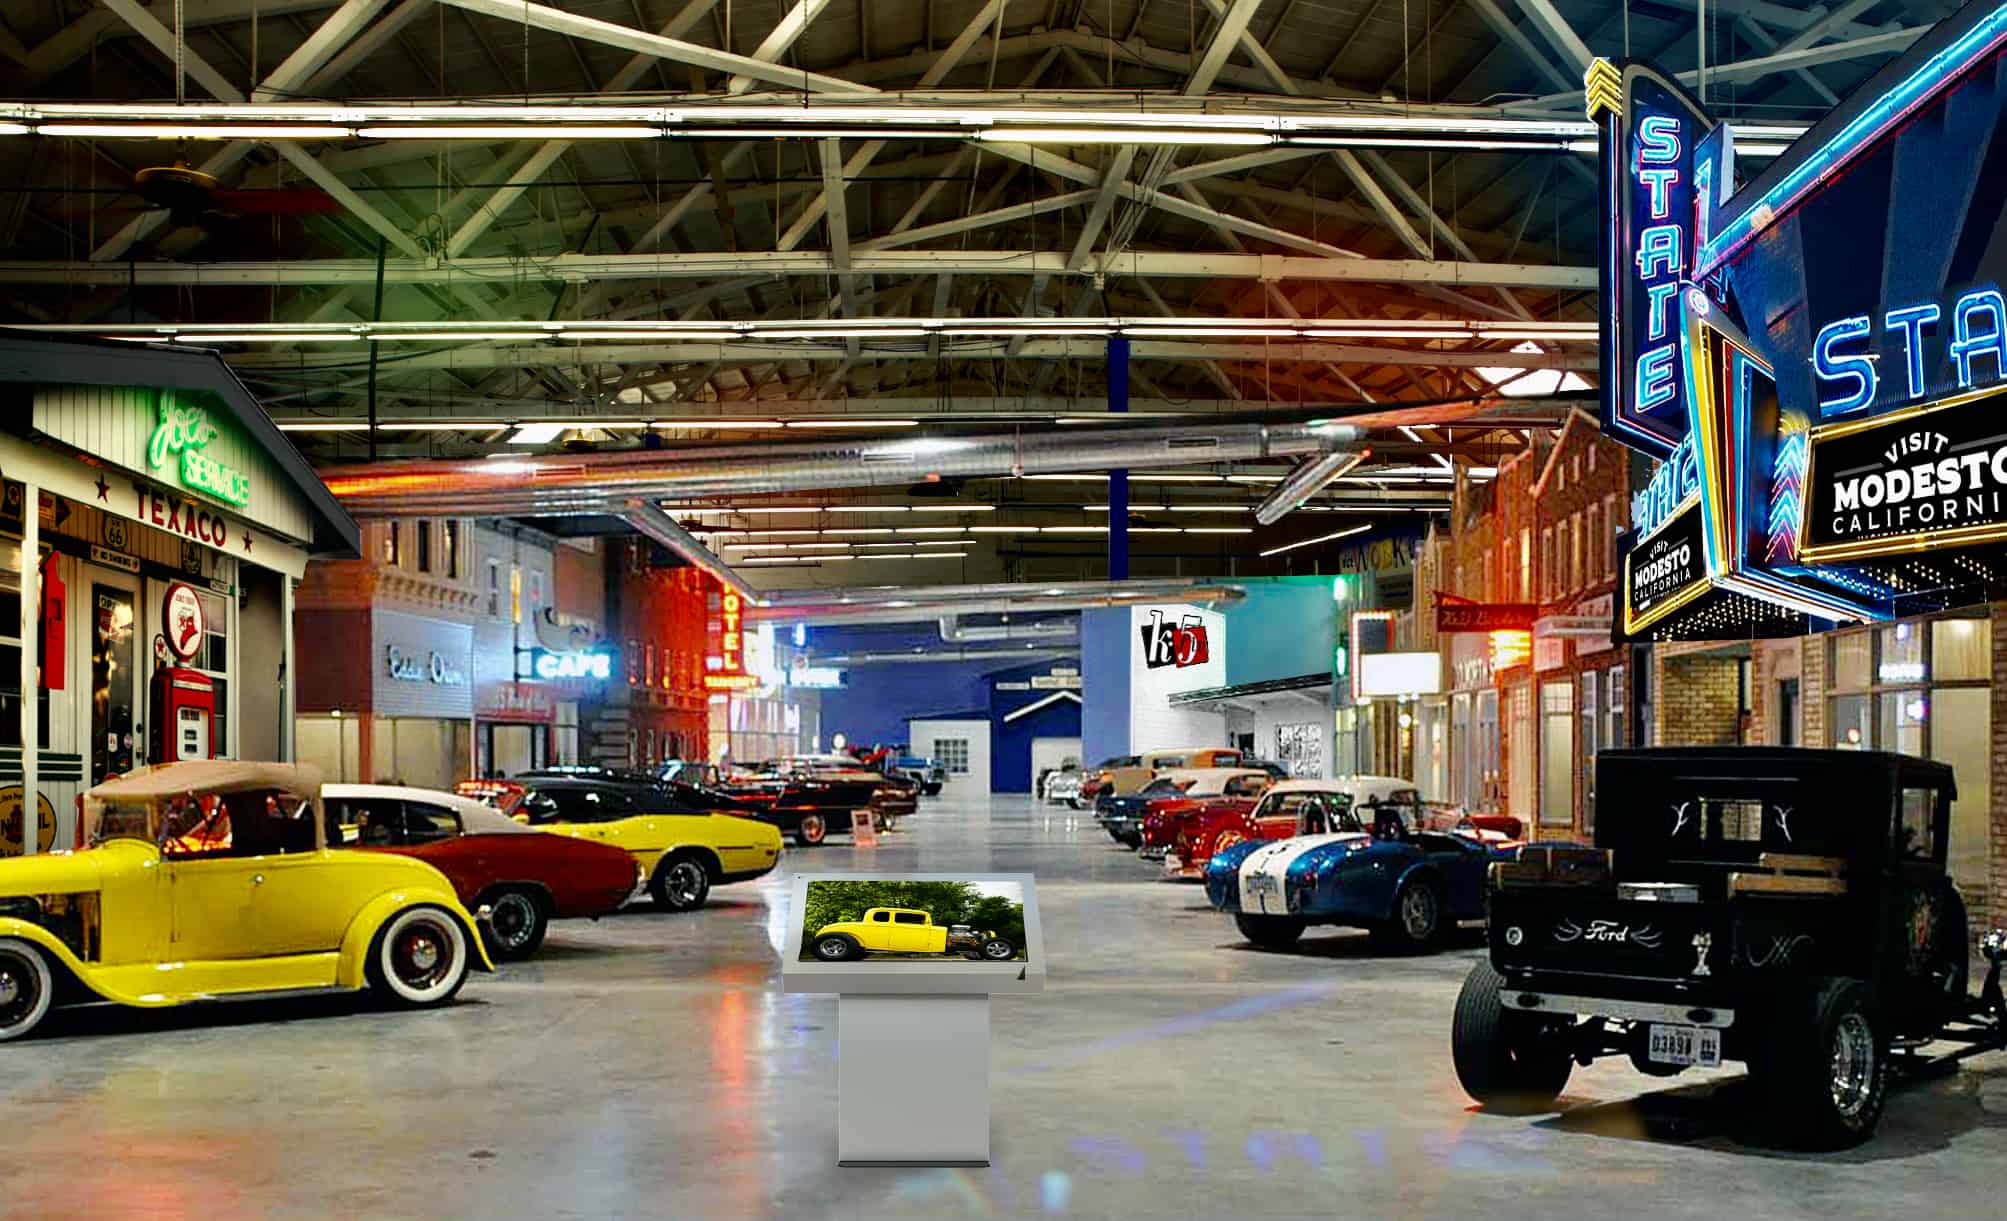 Car Building Porn - Group plans to open 'Graffiti' museum in Modesto by June 2021